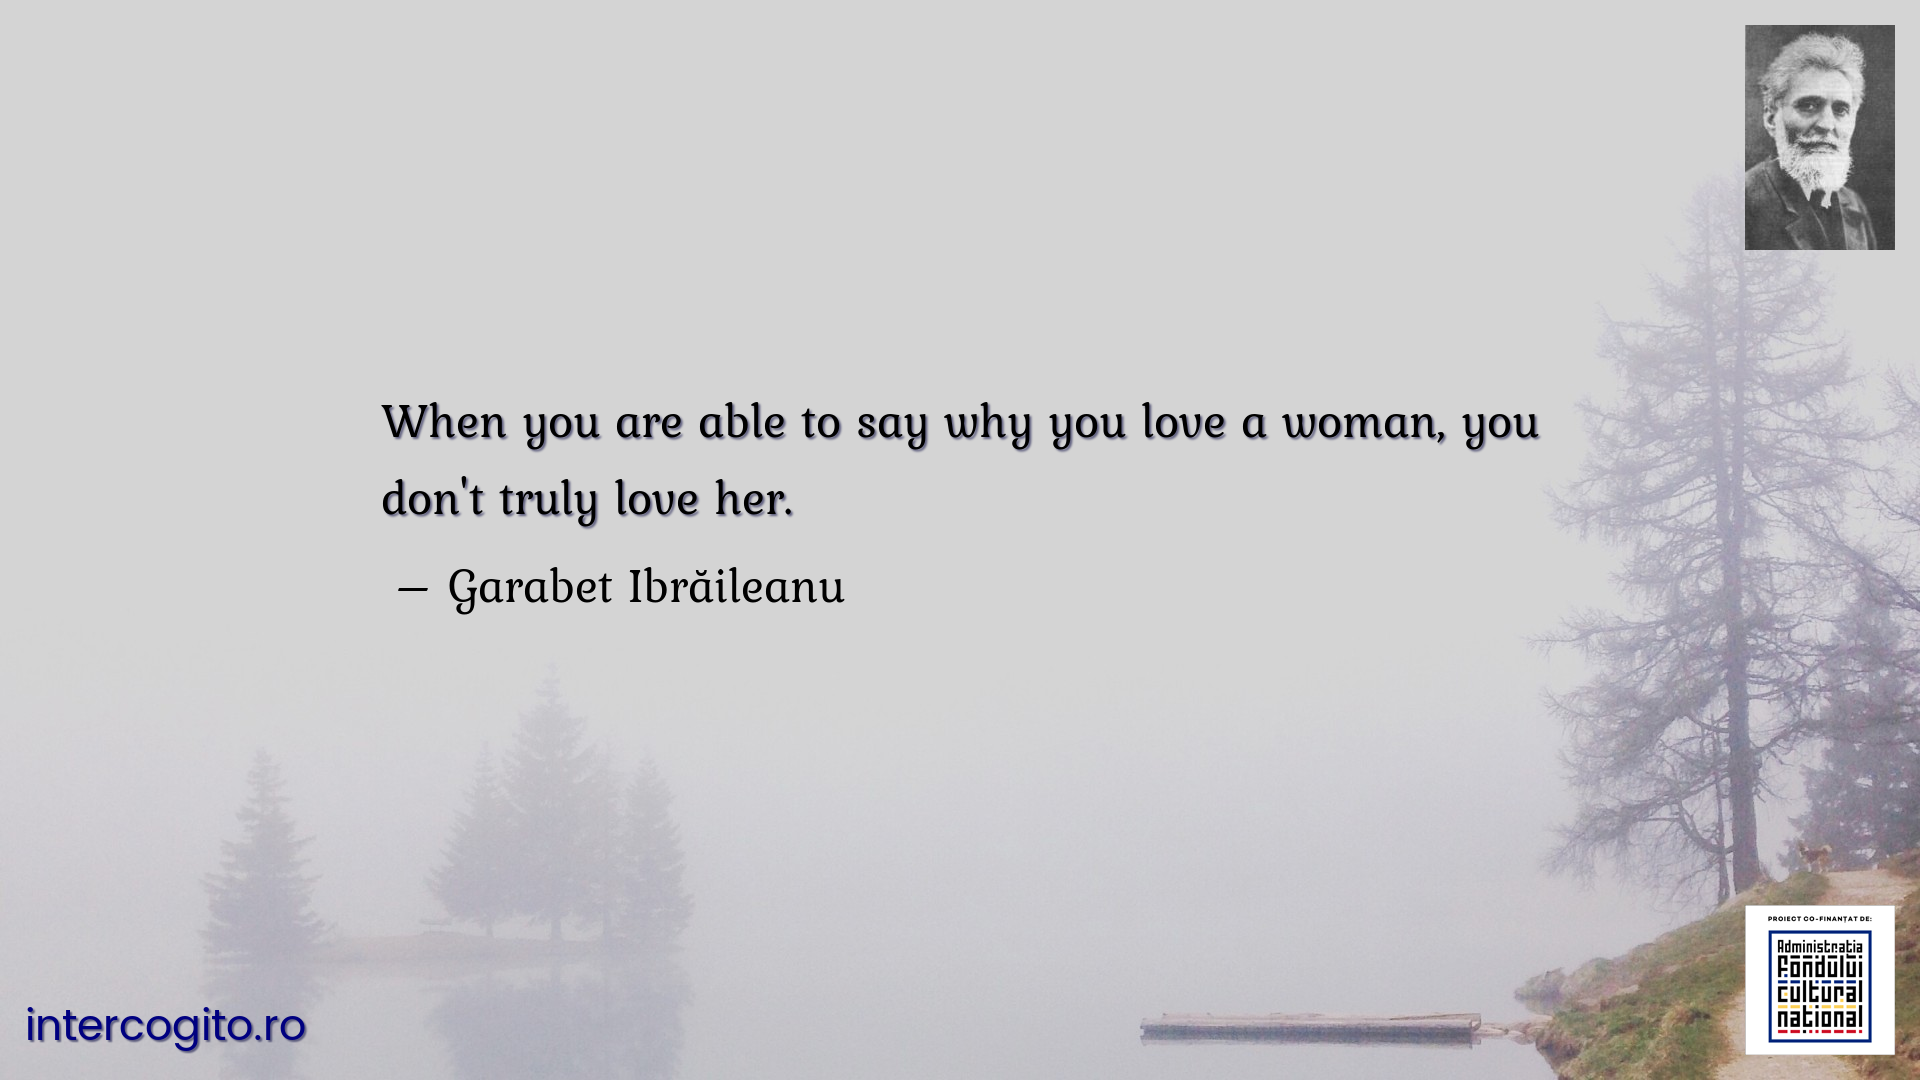 When you are able to say why you love a woman, you don't truly love her.